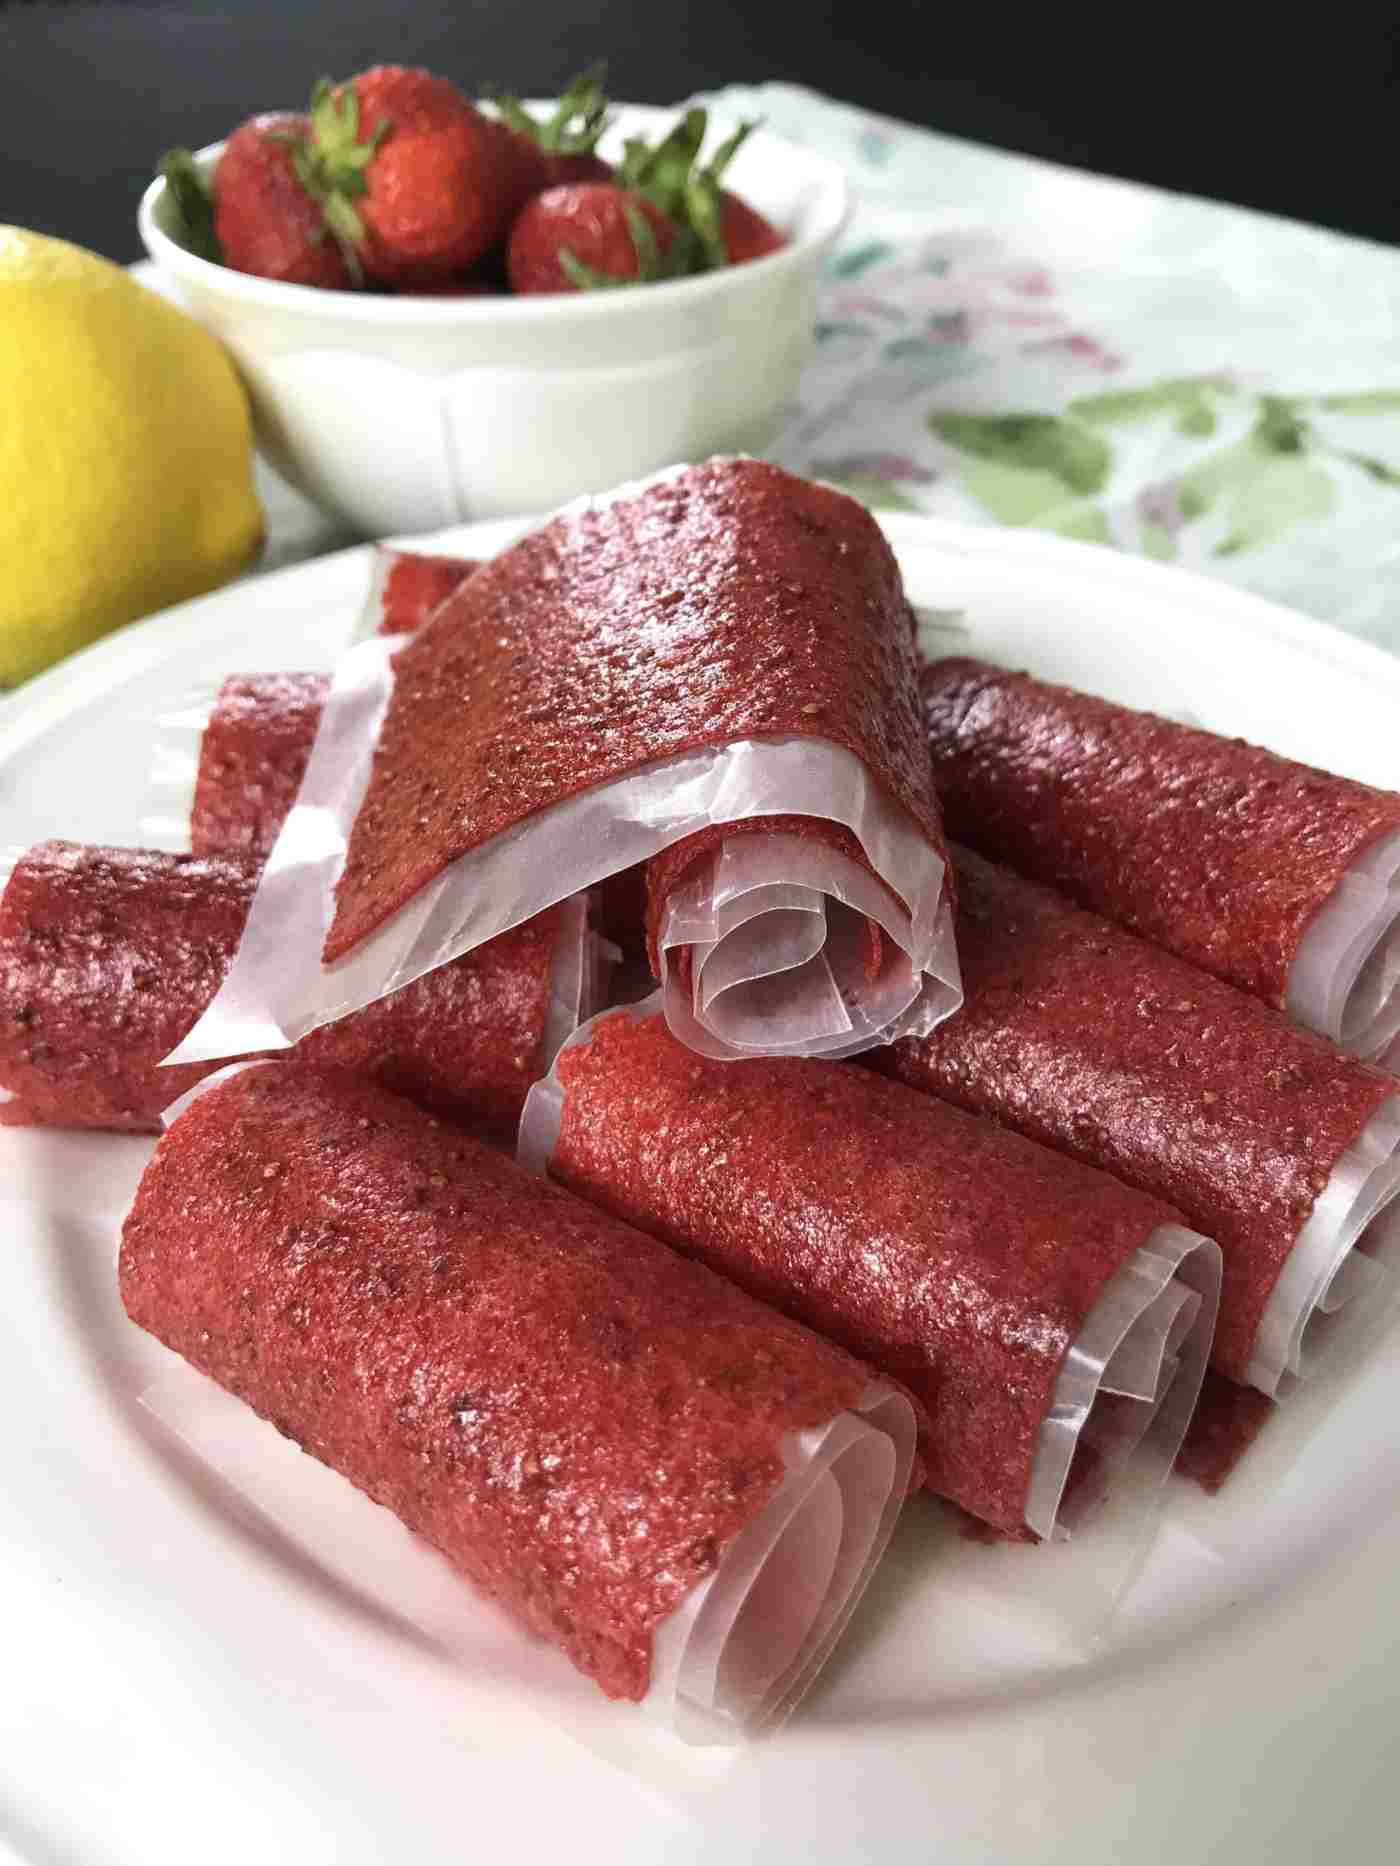 Affordable fruit for delicious fruit leather - Idea for after-cats